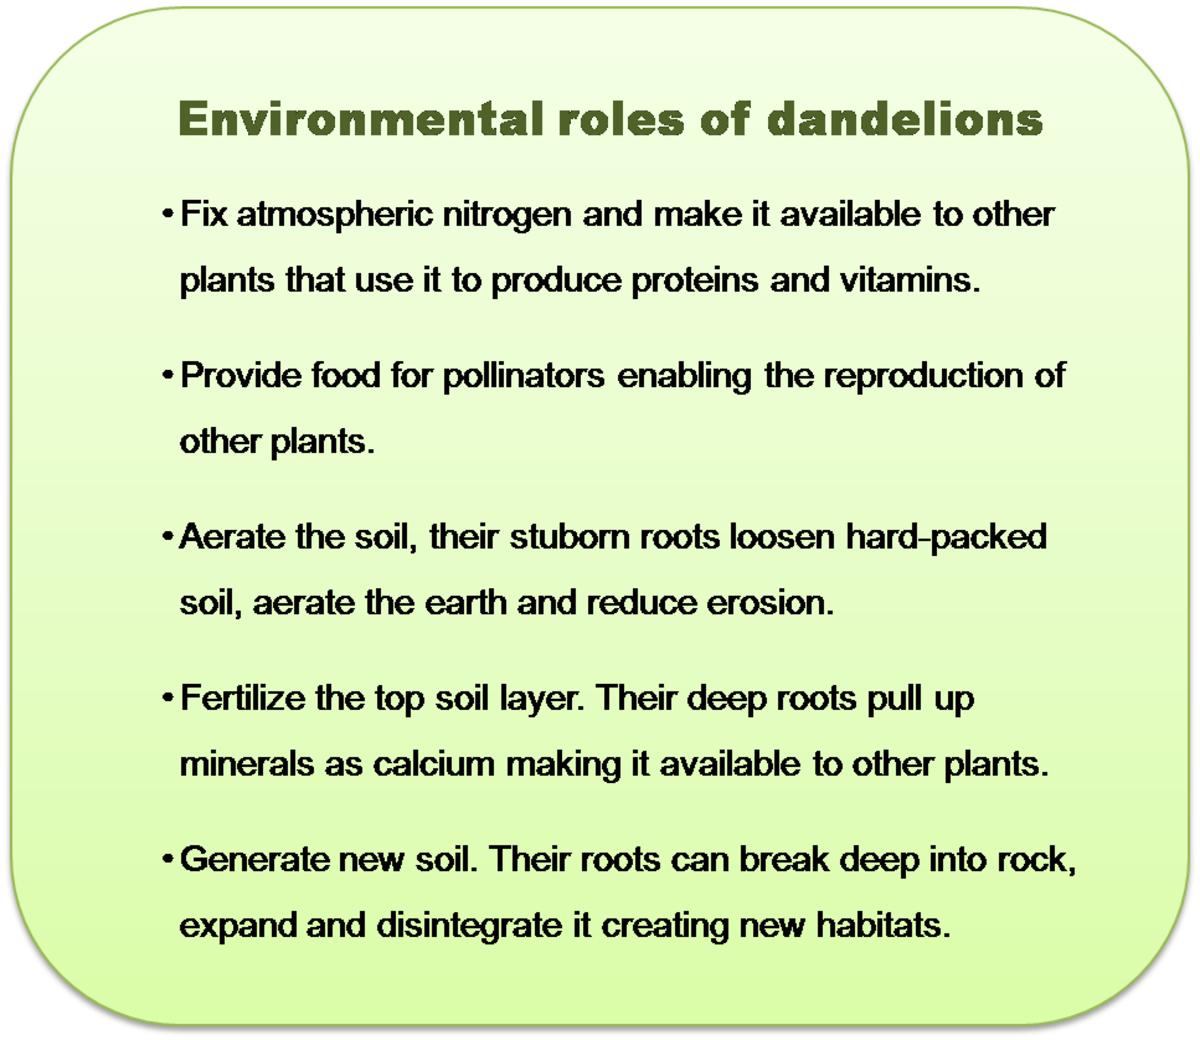 A summary of the environmental benefits of dandelions.